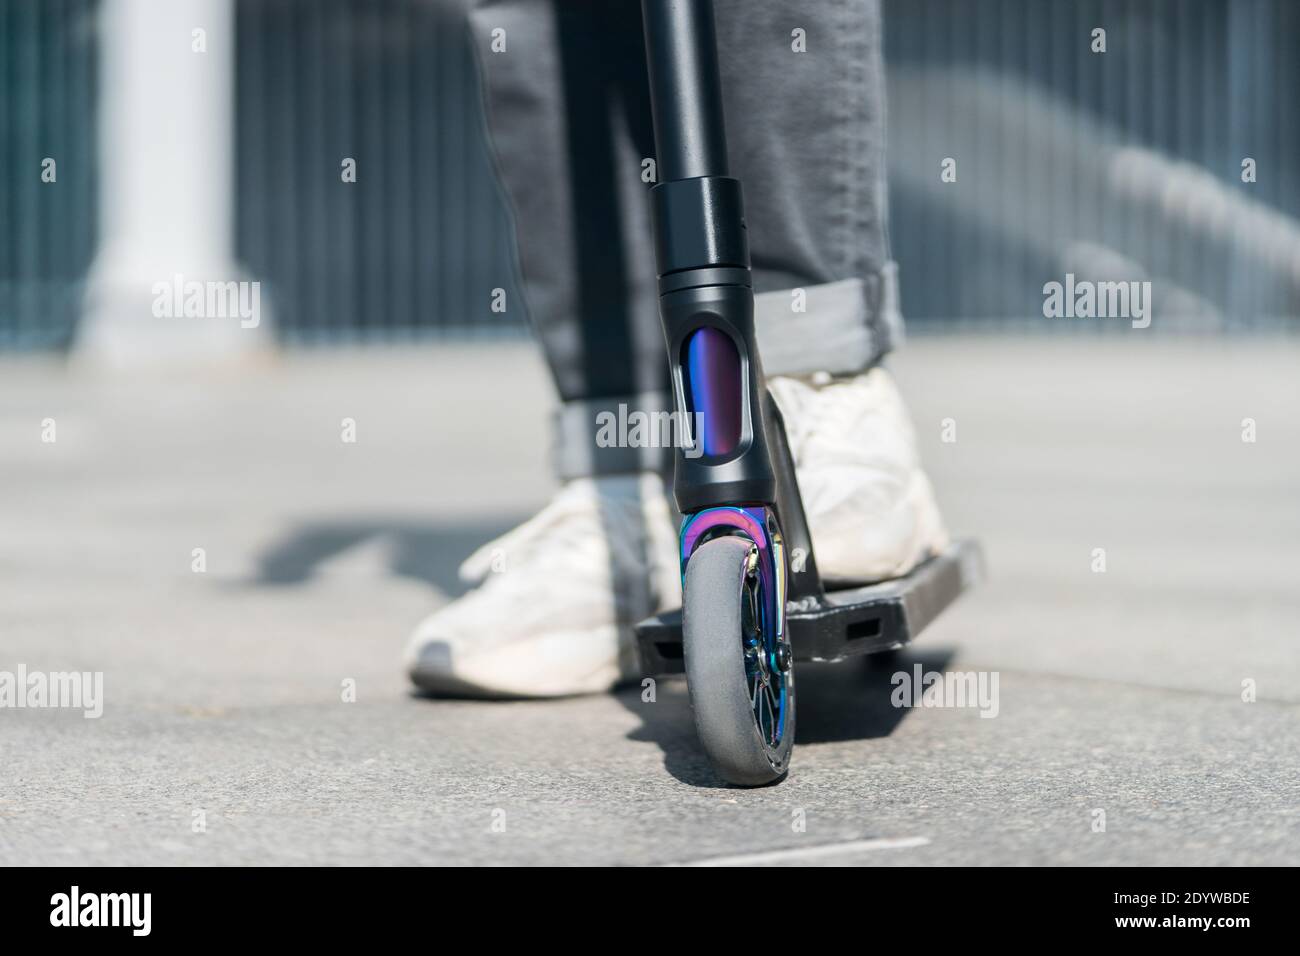 young teenager in sneaker on modern extreme stunt kick scooter in skatepark Stock Photo